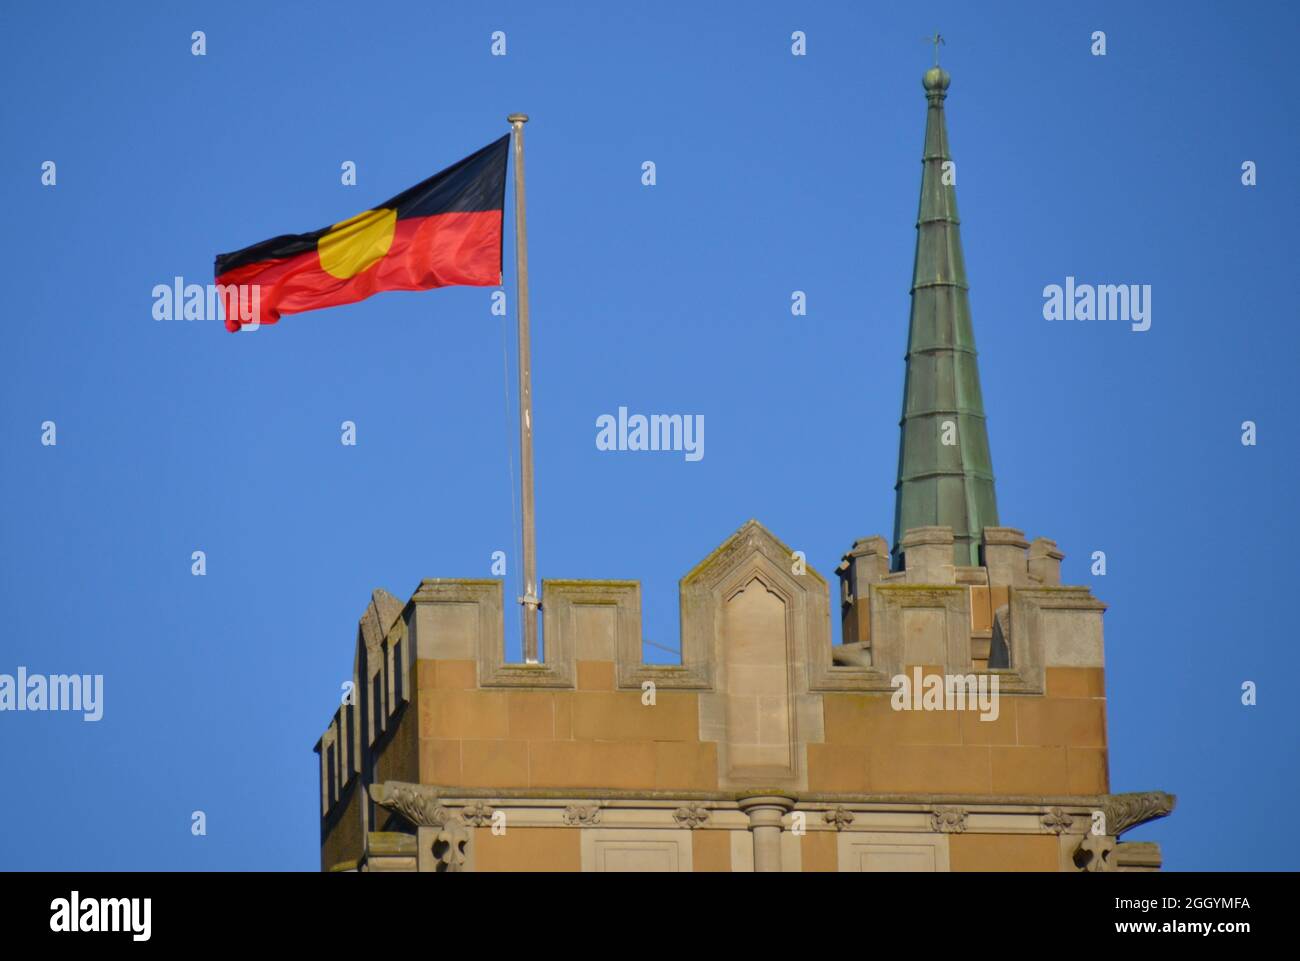 Red, yellow and black aboriginal first nations flag flying atop a sandstone building against a blue sky backdrop Stock Photo